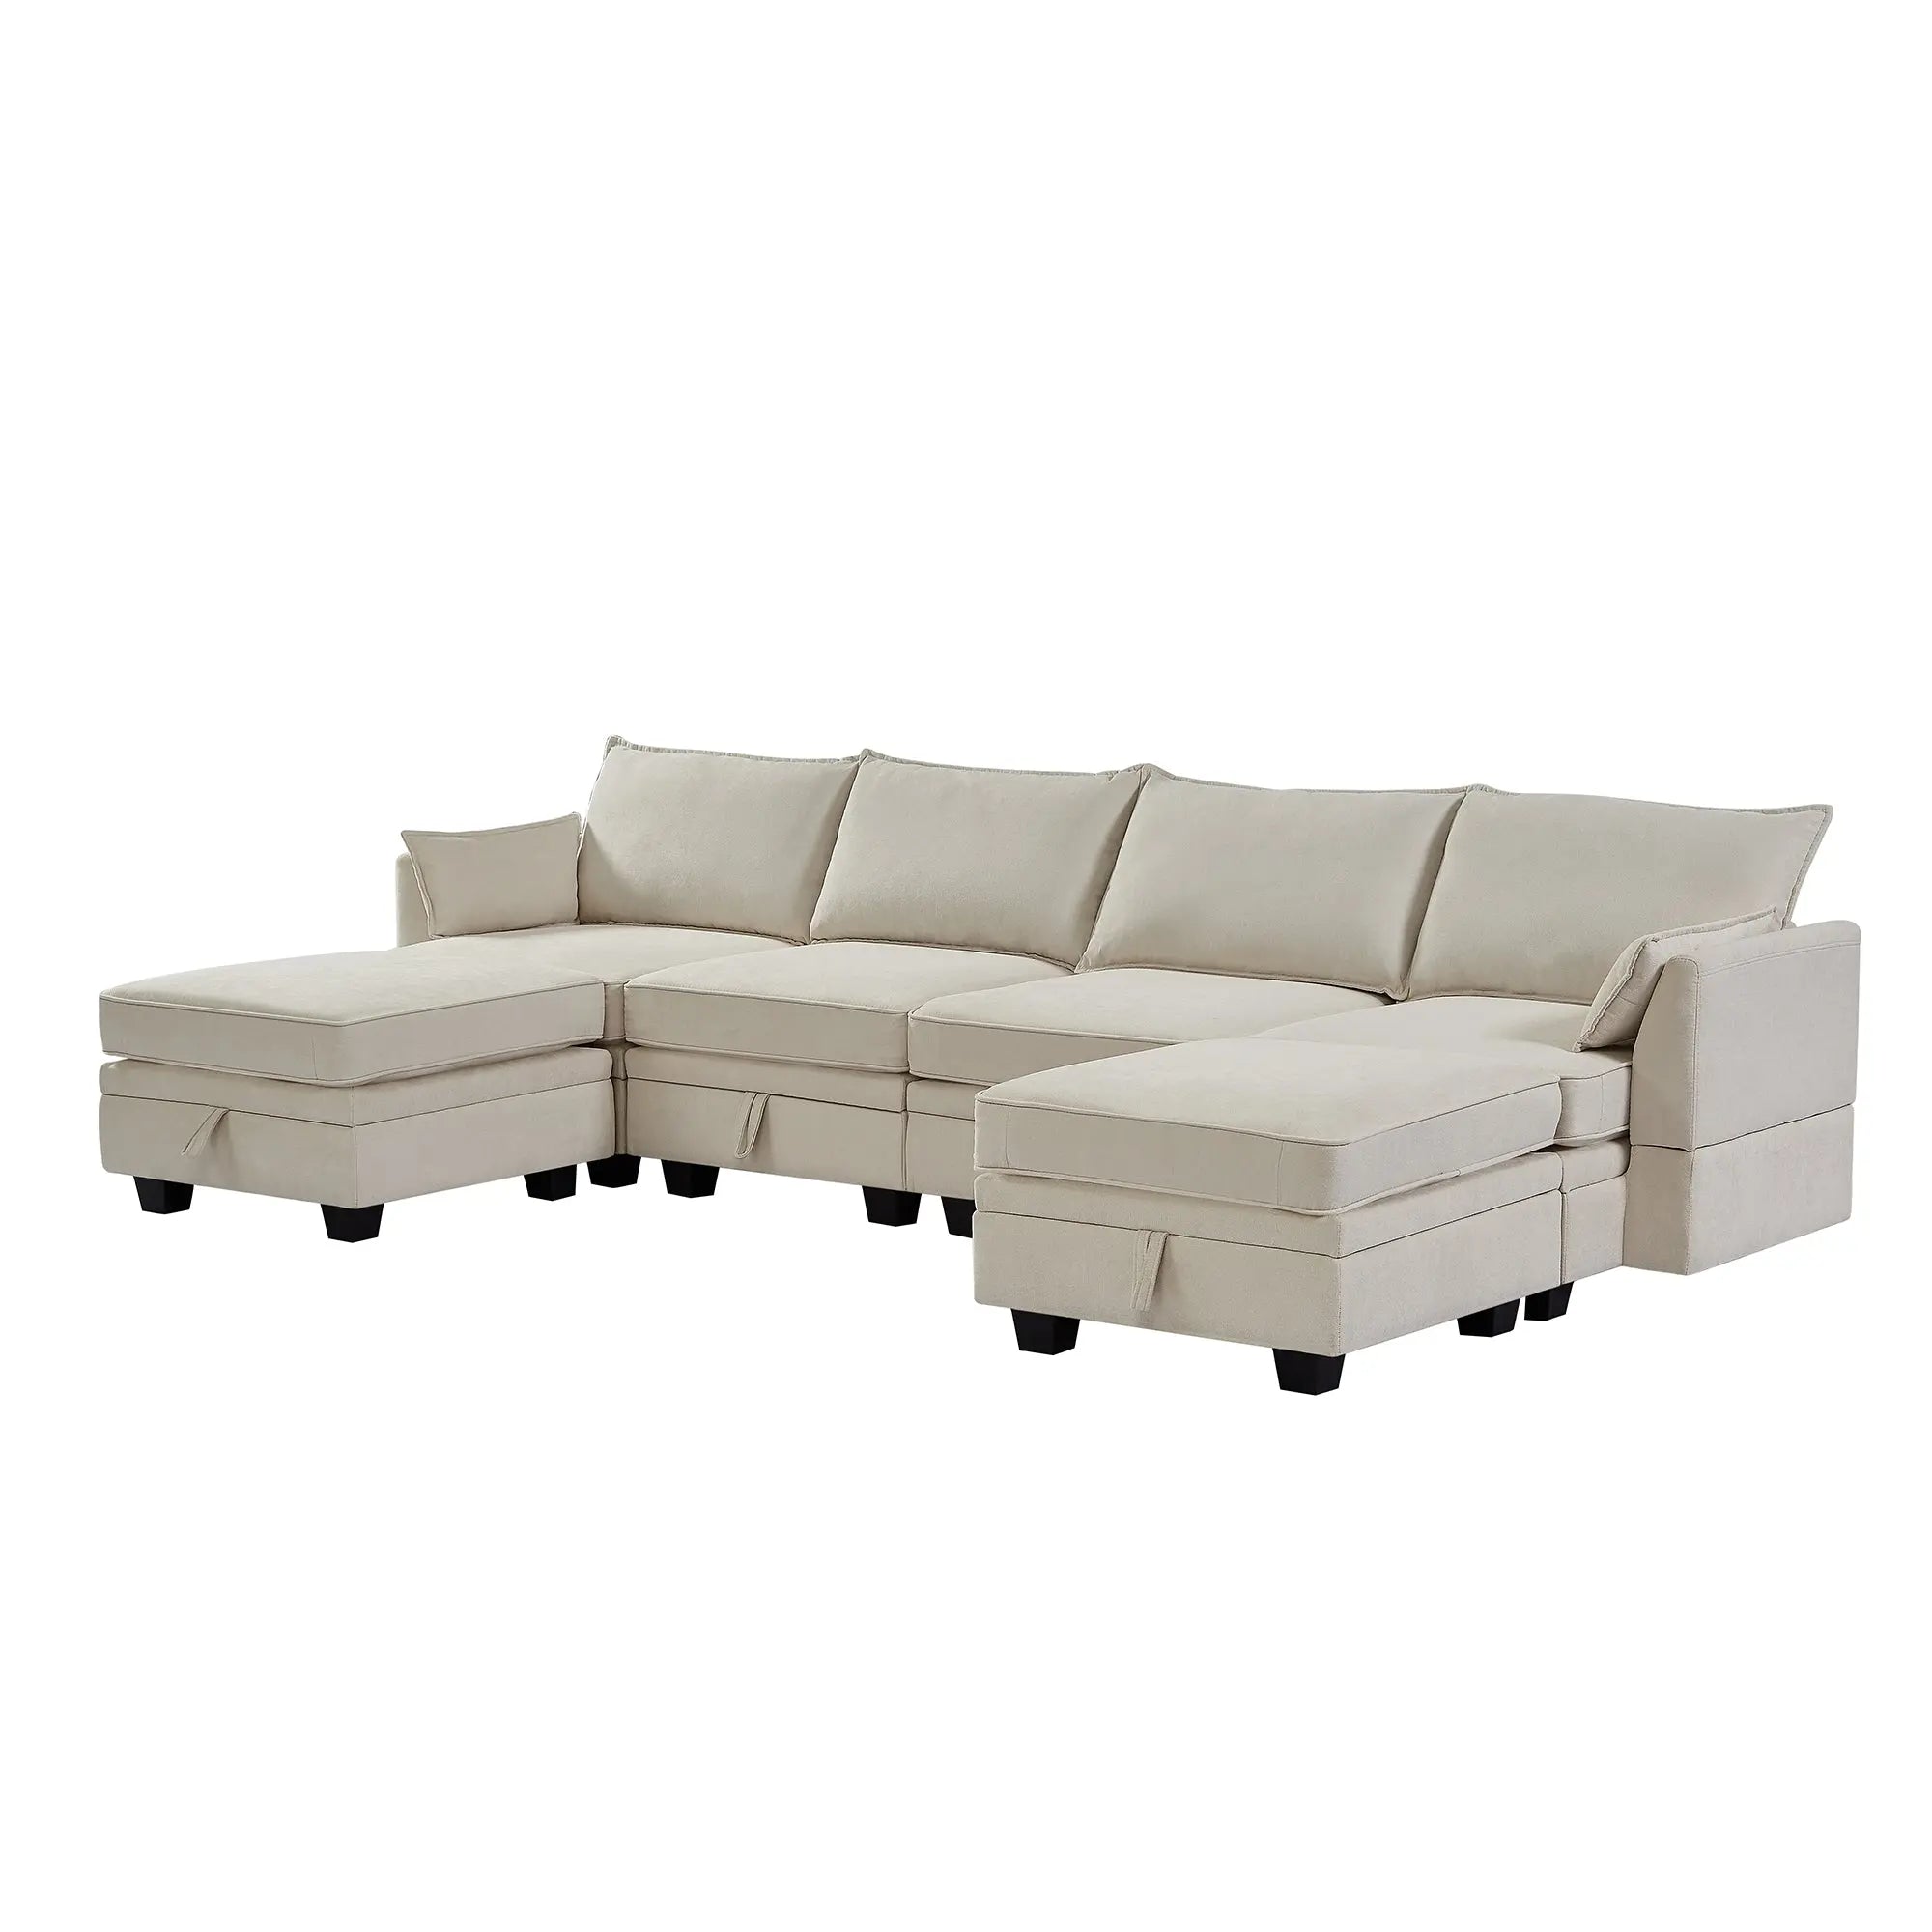 Bellemave 115" Modern Large U-Shape Modular Sectional Sofa, Convertible Sofa Bed with Reversible Chaise Bellemave